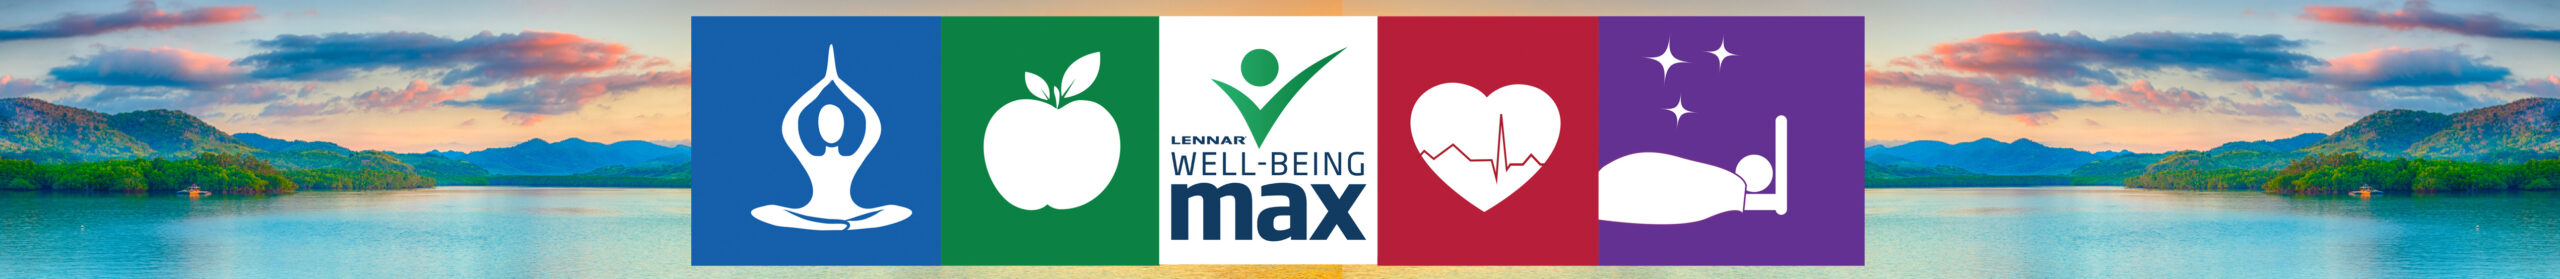 well being max image